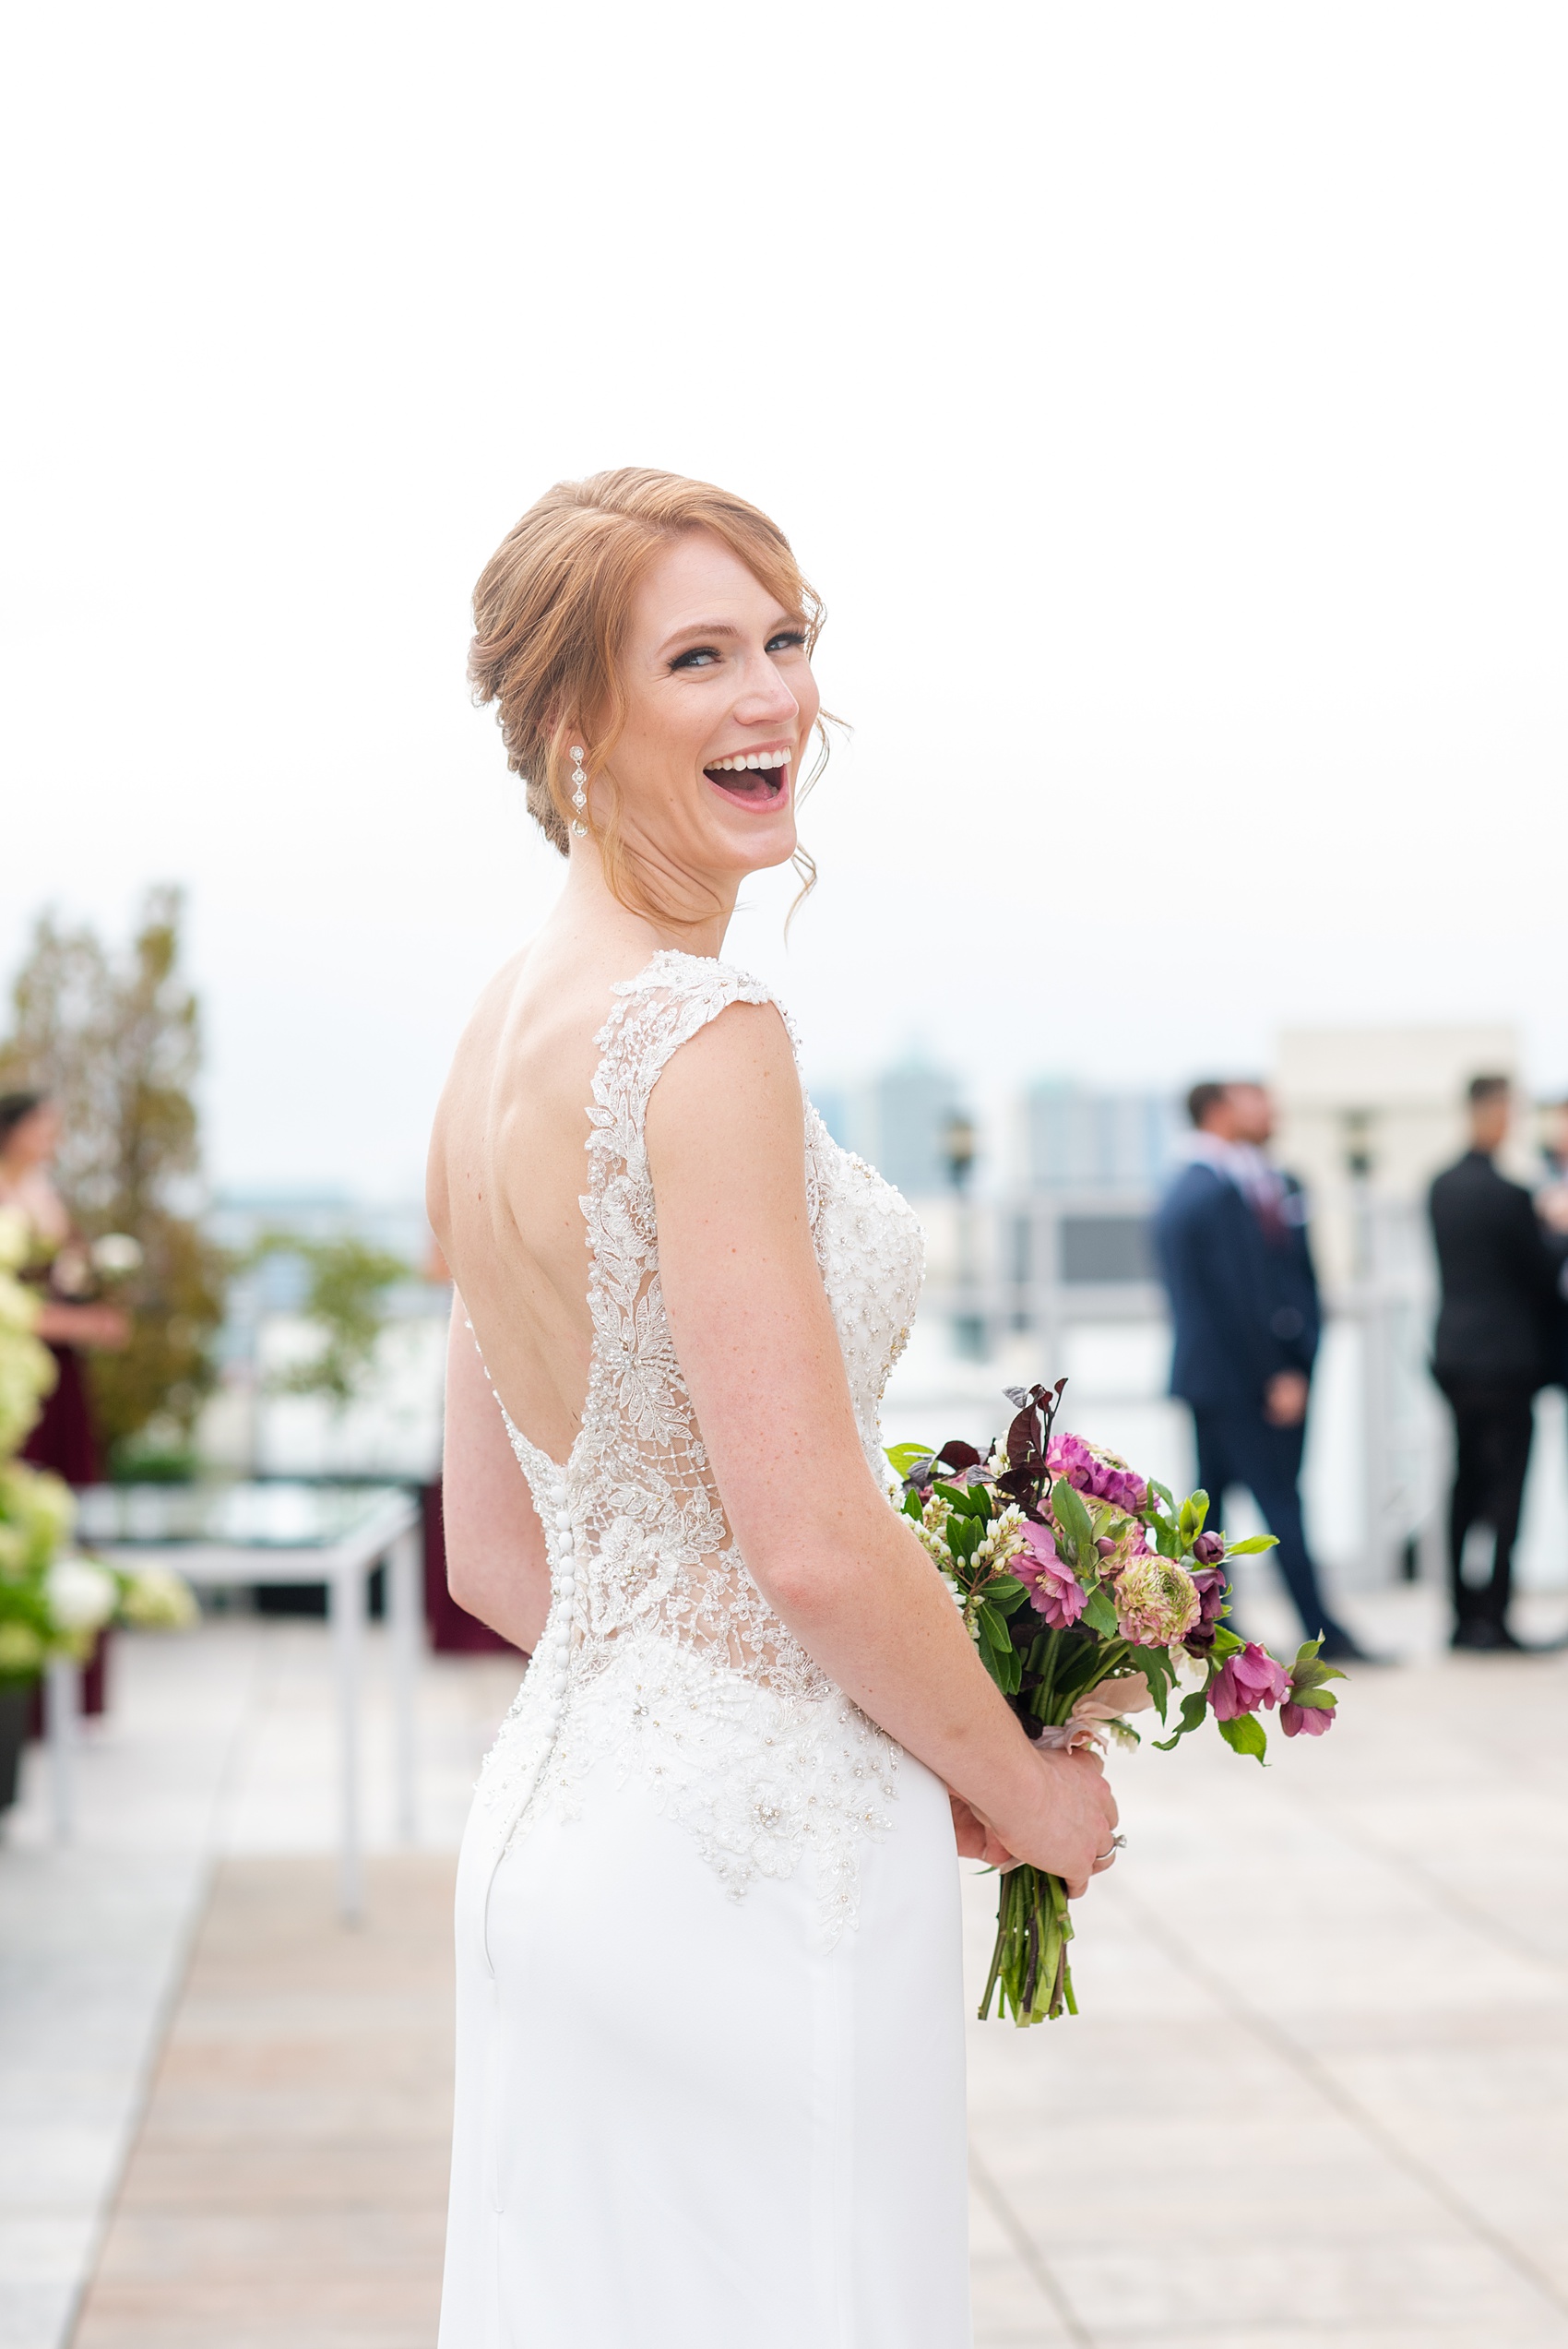 Photos of a NYC wedding venue, Tribeca Rooftop, by Mikkel Paige Photography. This ceremony and reception location has an outdoor space overlooking the Manhattan skyline. These pictures will provide inspiration in New York! The bride wore a lace illusion gown with beading, her hair up, and carried a bouquet of fall flowers. Click through for more details from this celebration! #TribecaRooftop #MikkelPaige #NYCwedding #NYCWeddingVenues #NYCWeddingPhotography #Ranunculus #FallBouquet 